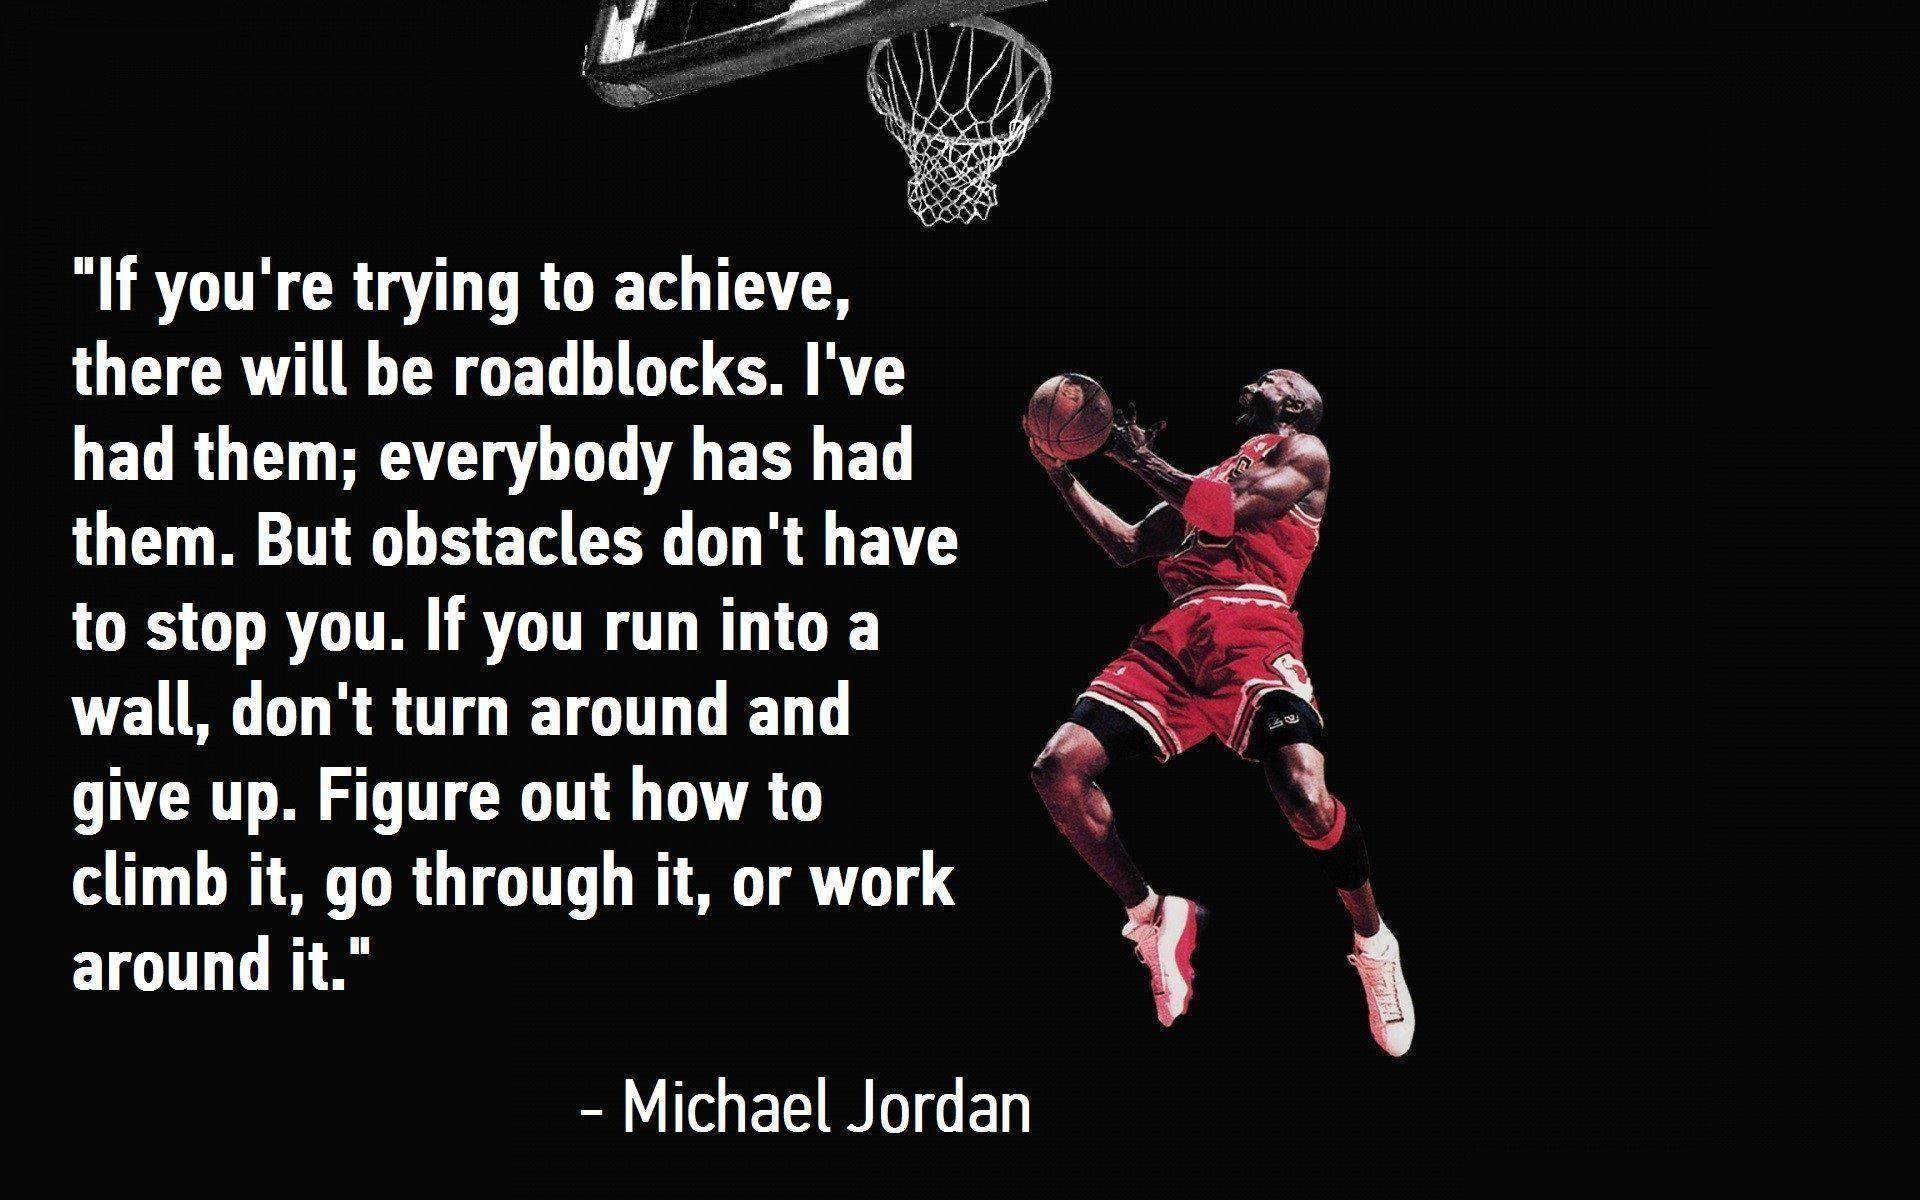 Basketball Quotes Wallpapers Hd Fun Timewebsite free image download